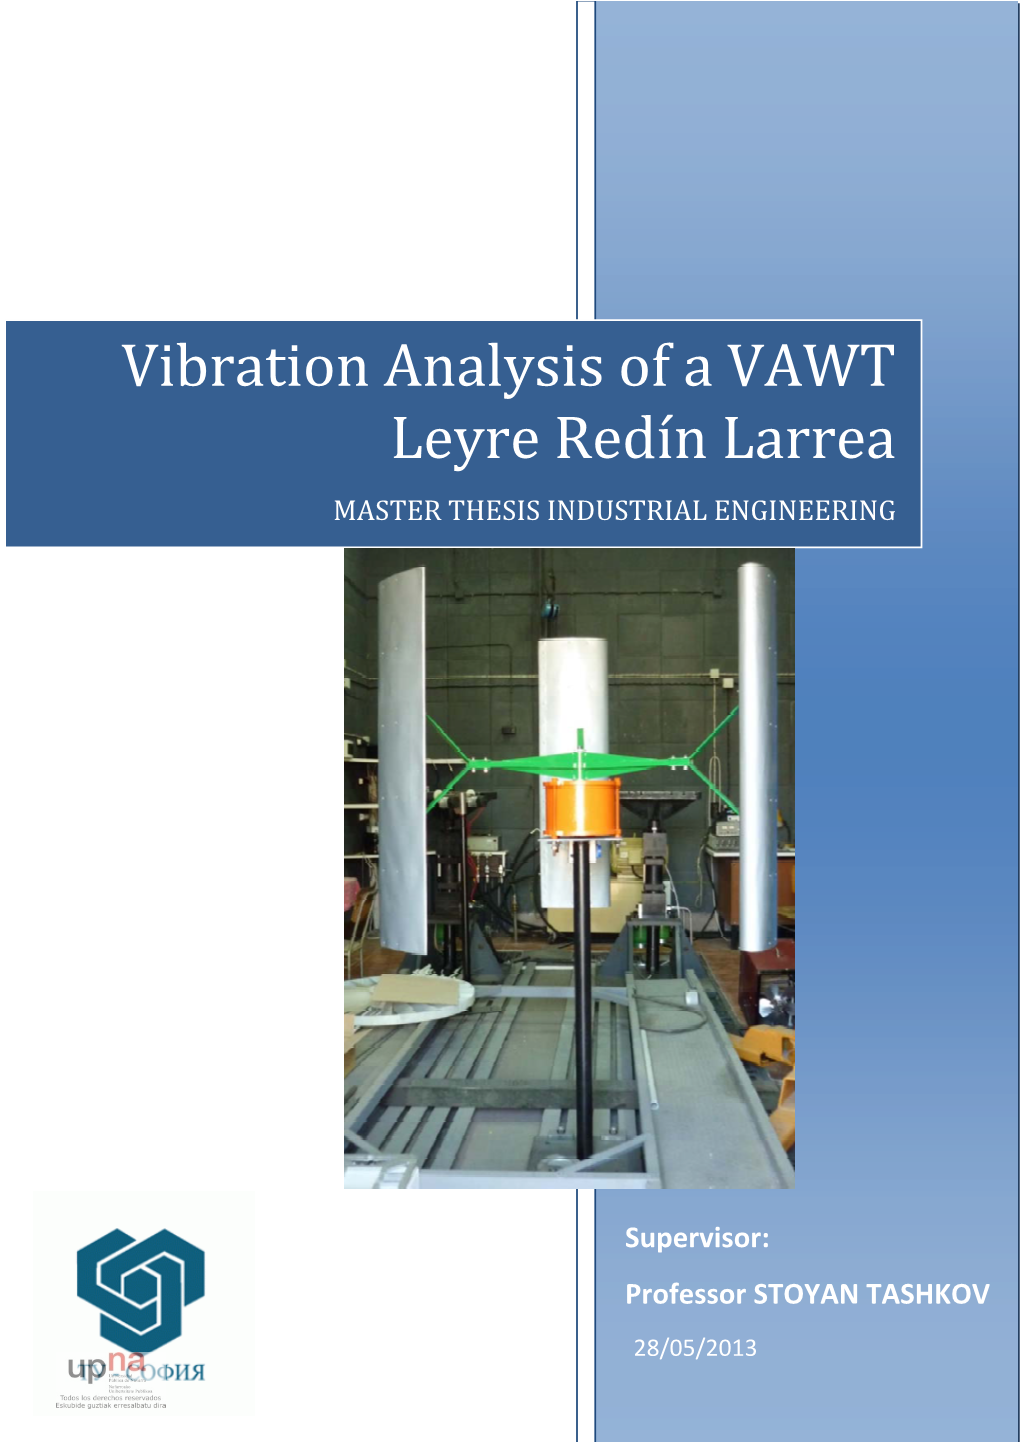 Vibration Analysis of a VAWT Leyre Redín Larrea MASTER THESIS INDUSTRIAL ENGINEERING